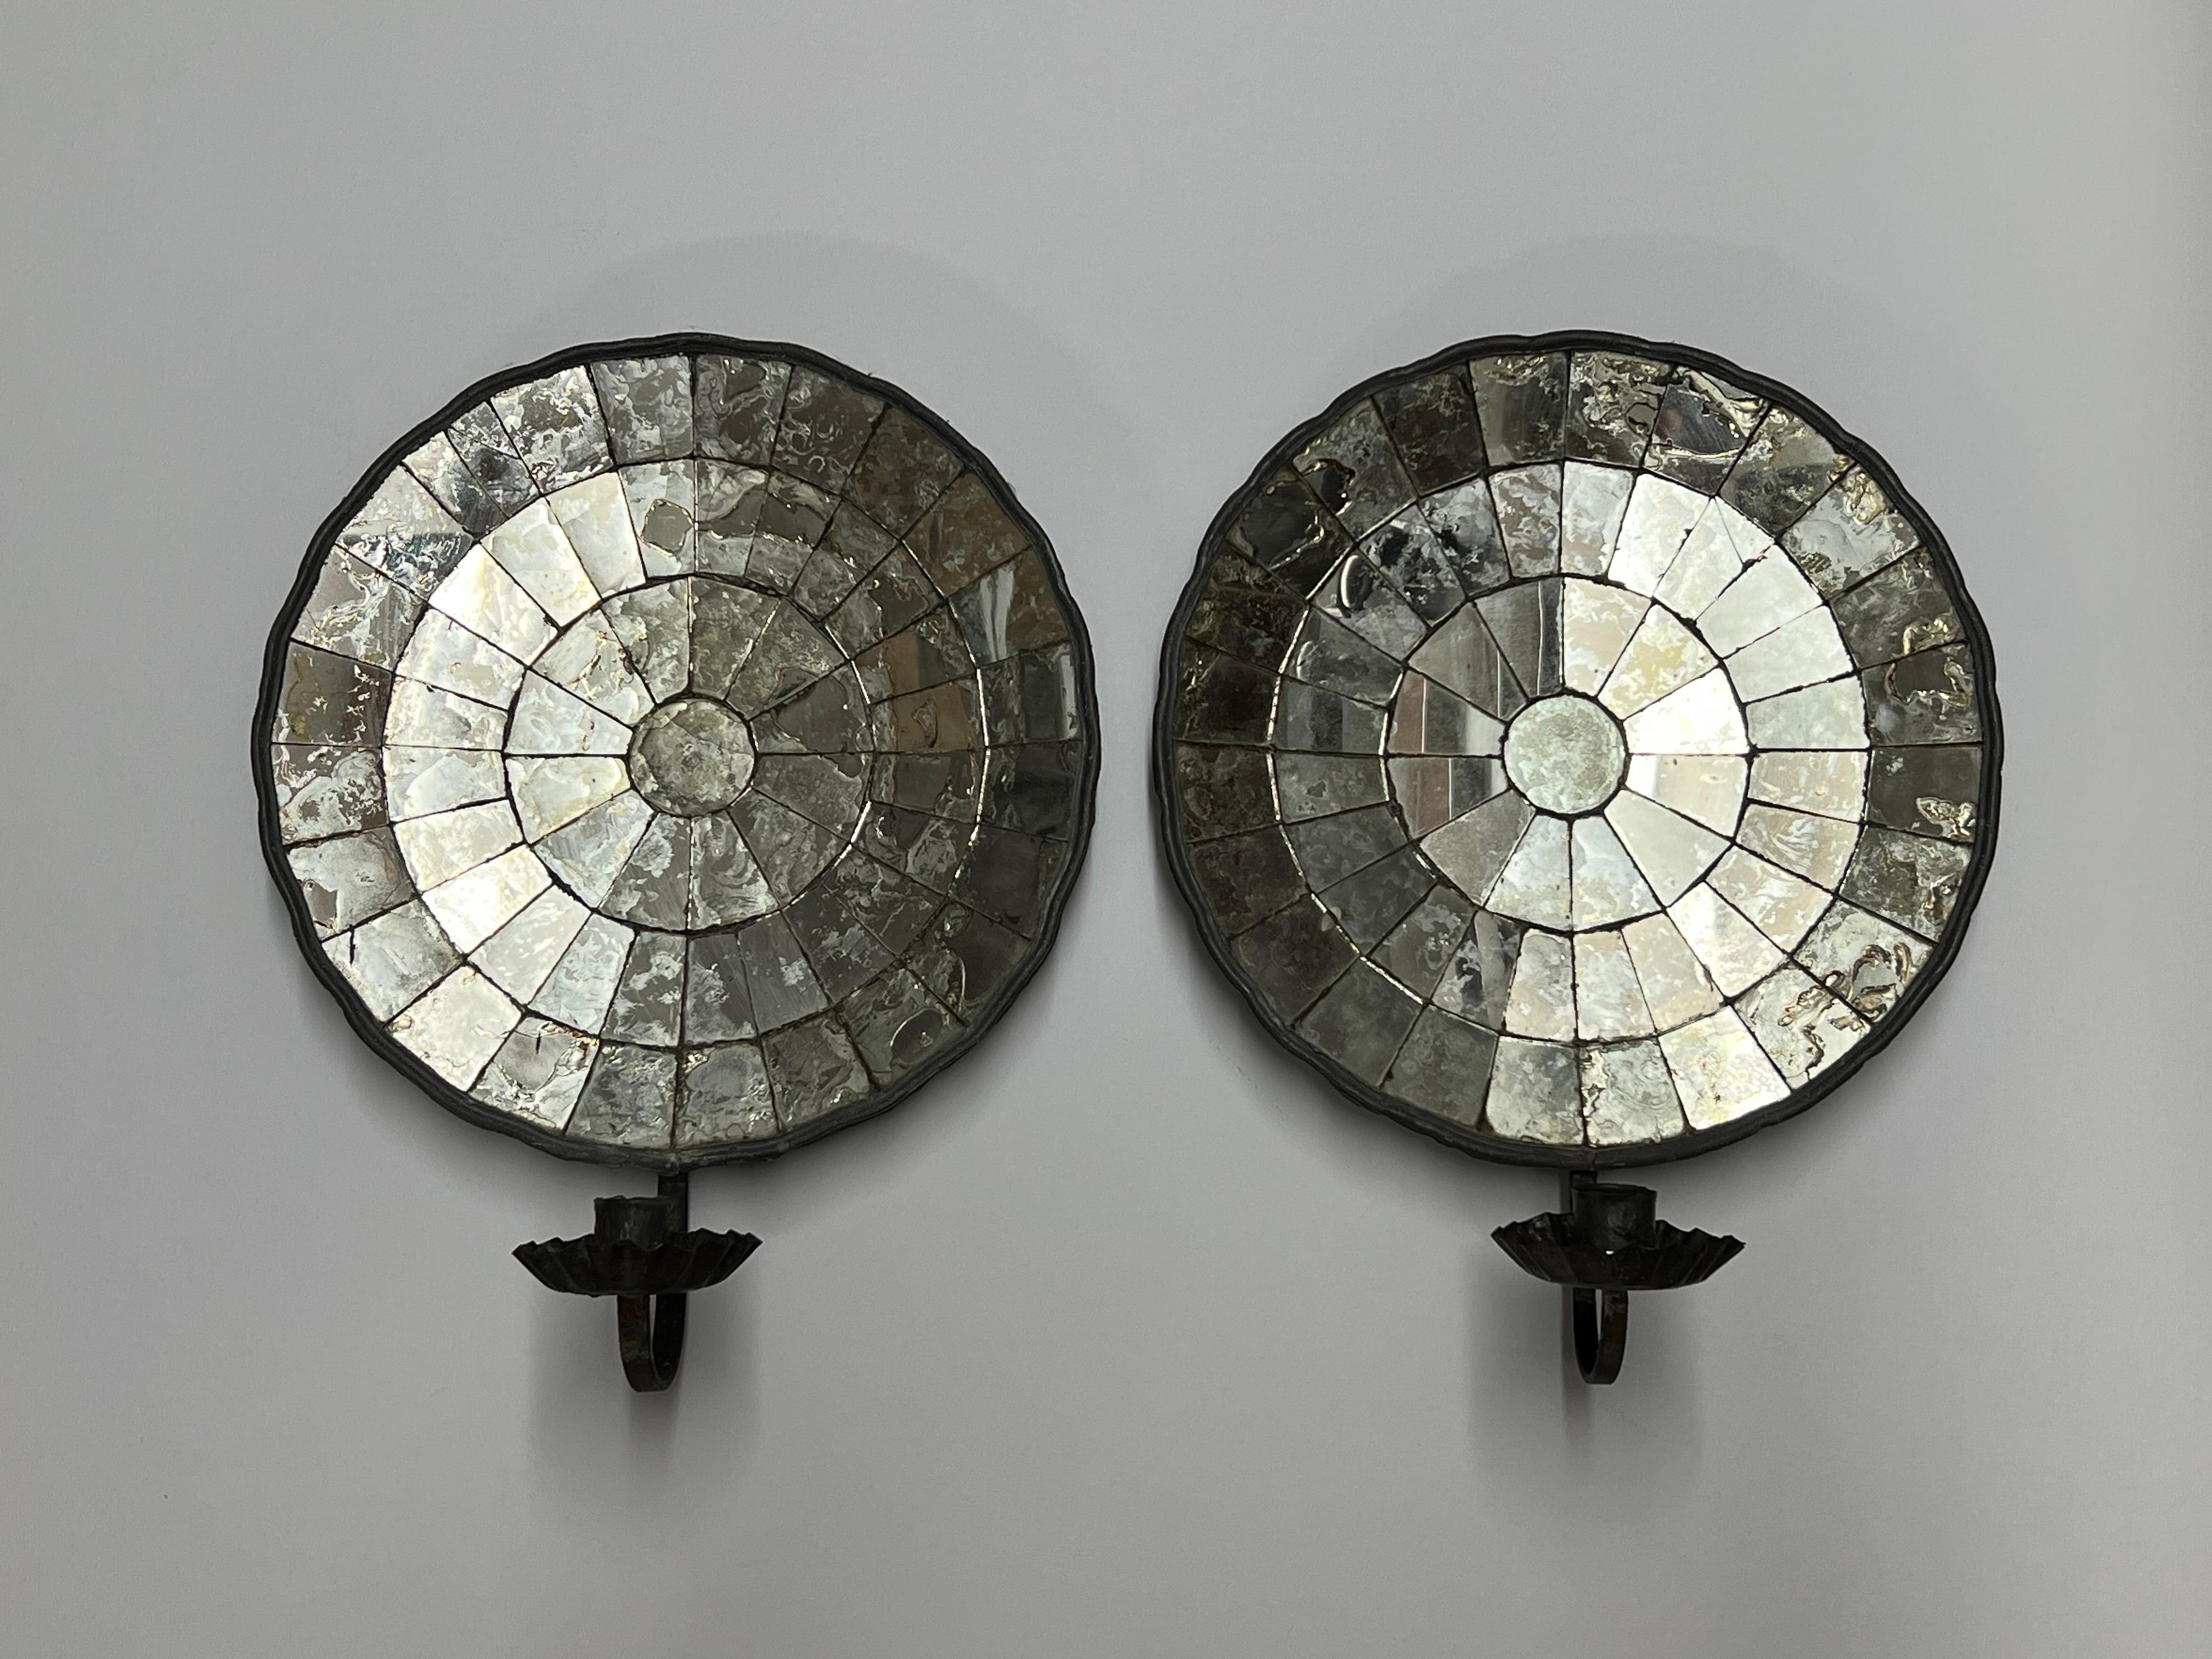 Tin Pair of Early American Reflective Candle Sconces